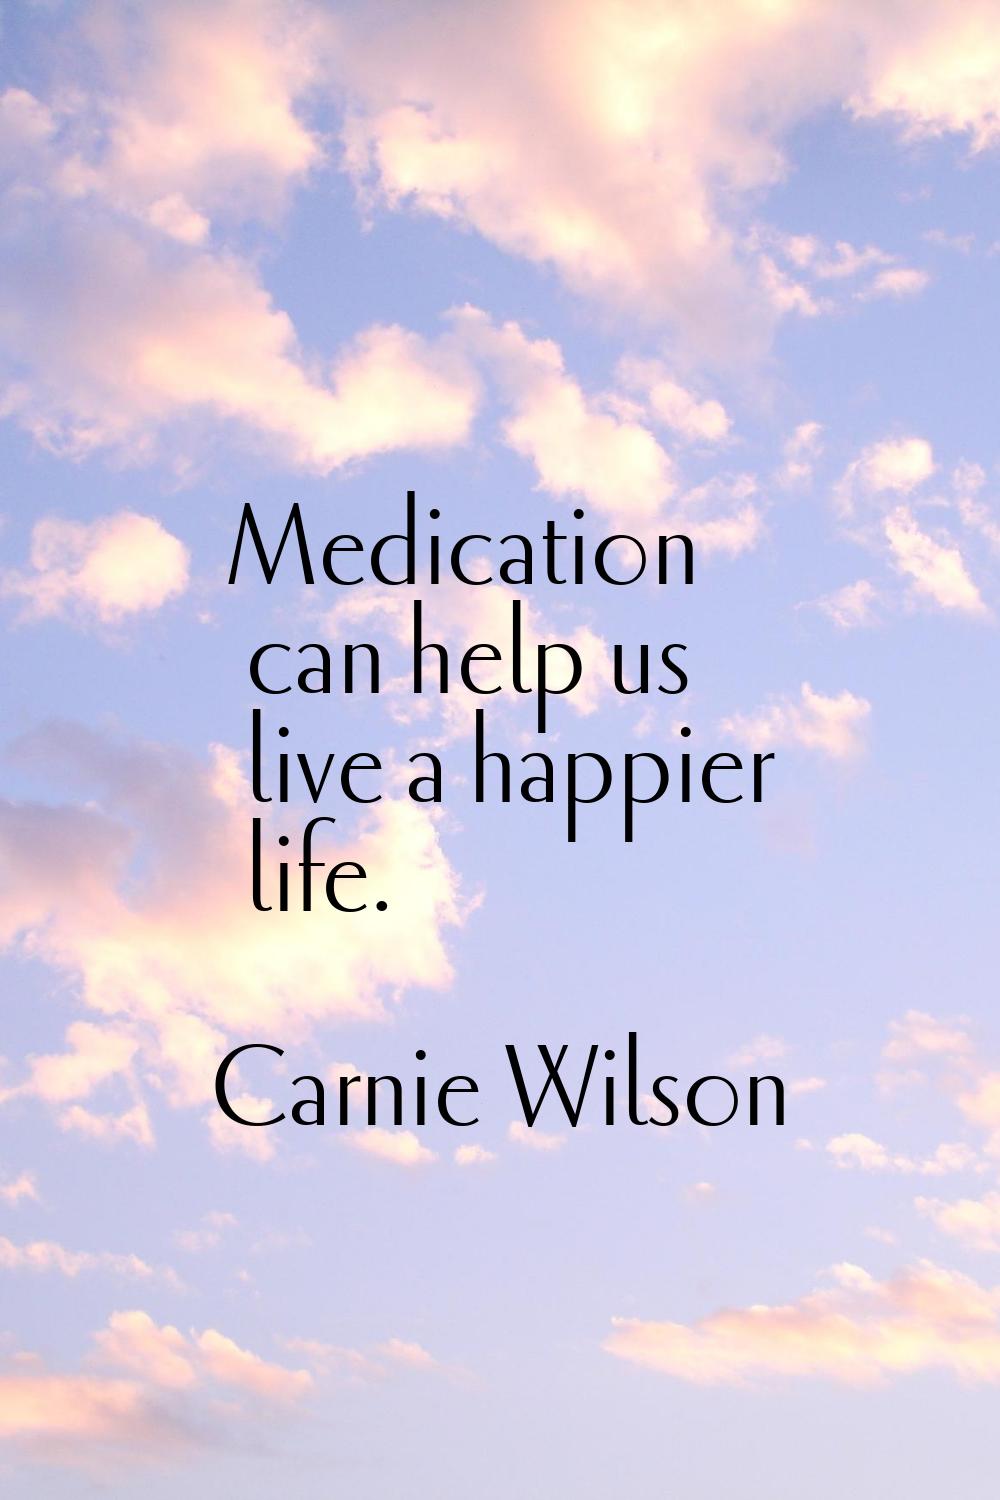 Medication can help us live a happier life.